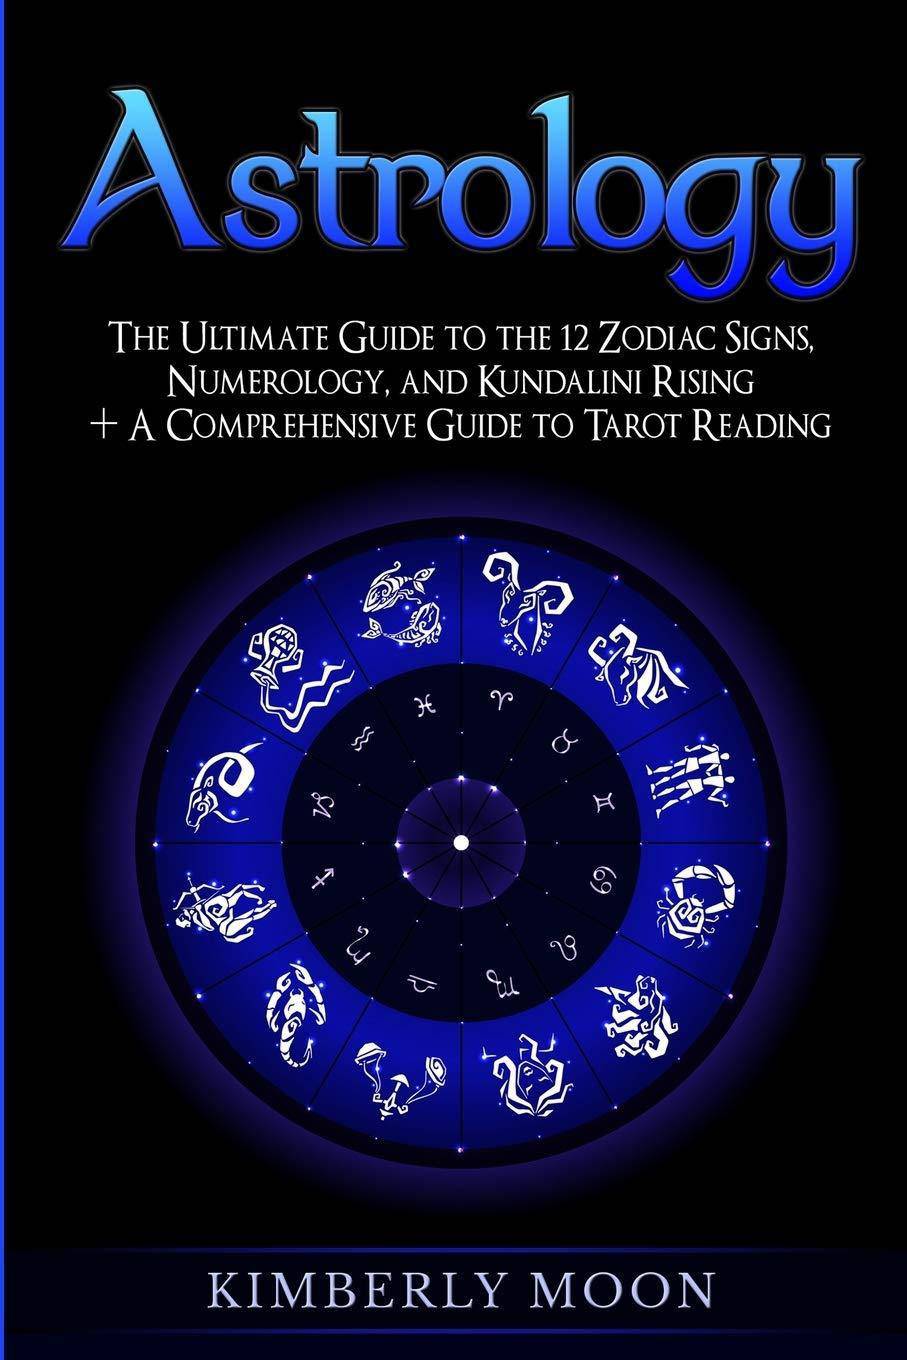 Astrology: The Ultimate Guide to the 12 Zodiac Signs, Numerology - SureShot Books Publishing LLC